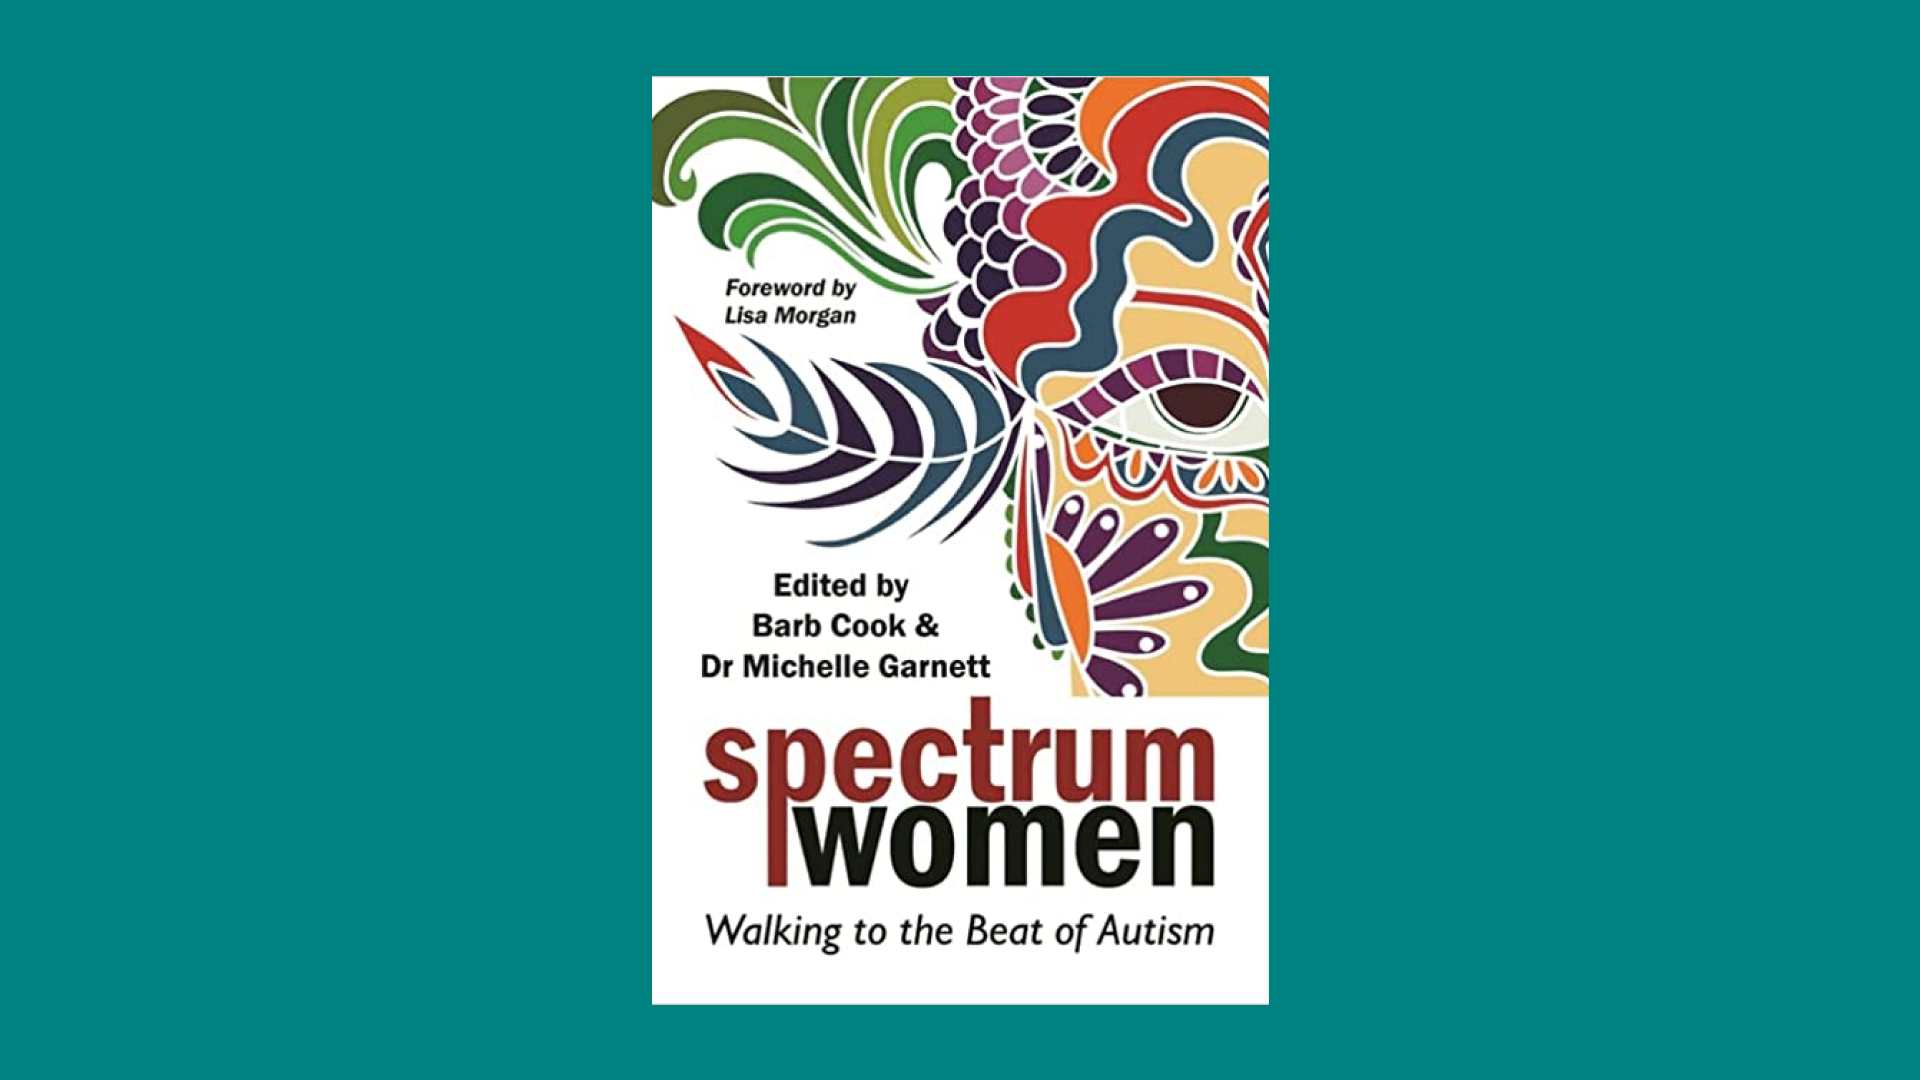 Cover of book "Spectrum Women," which includes a close-up drawing of a woman's face and floral designs